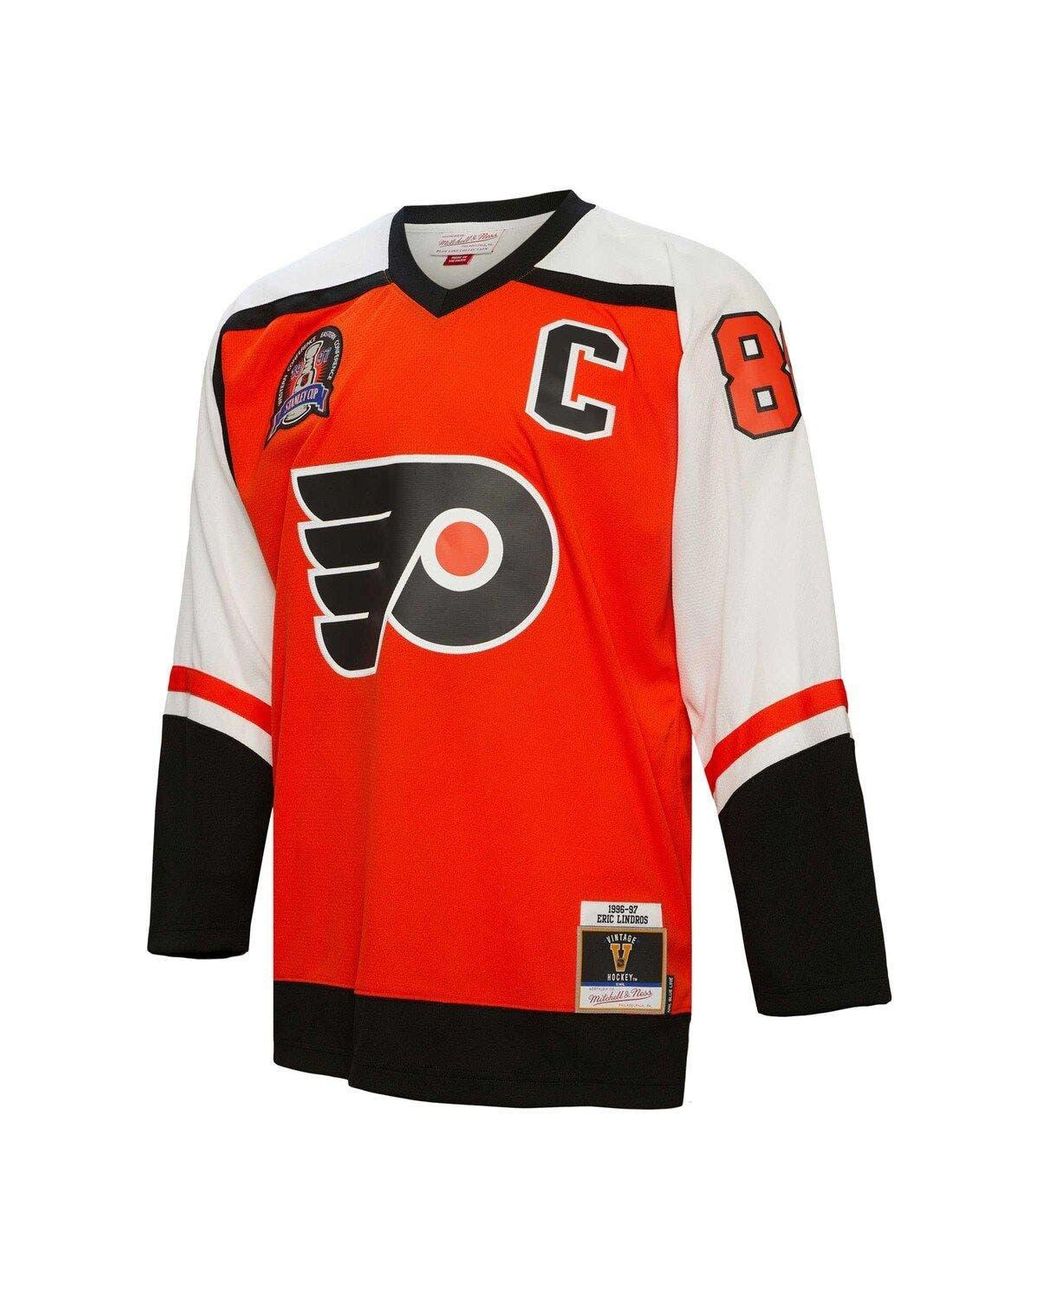 MITCHELL & NESS: BAGS AND ACCESSORIES, MITCHELL AND NESS PHILADELPHIA  FLYERS B